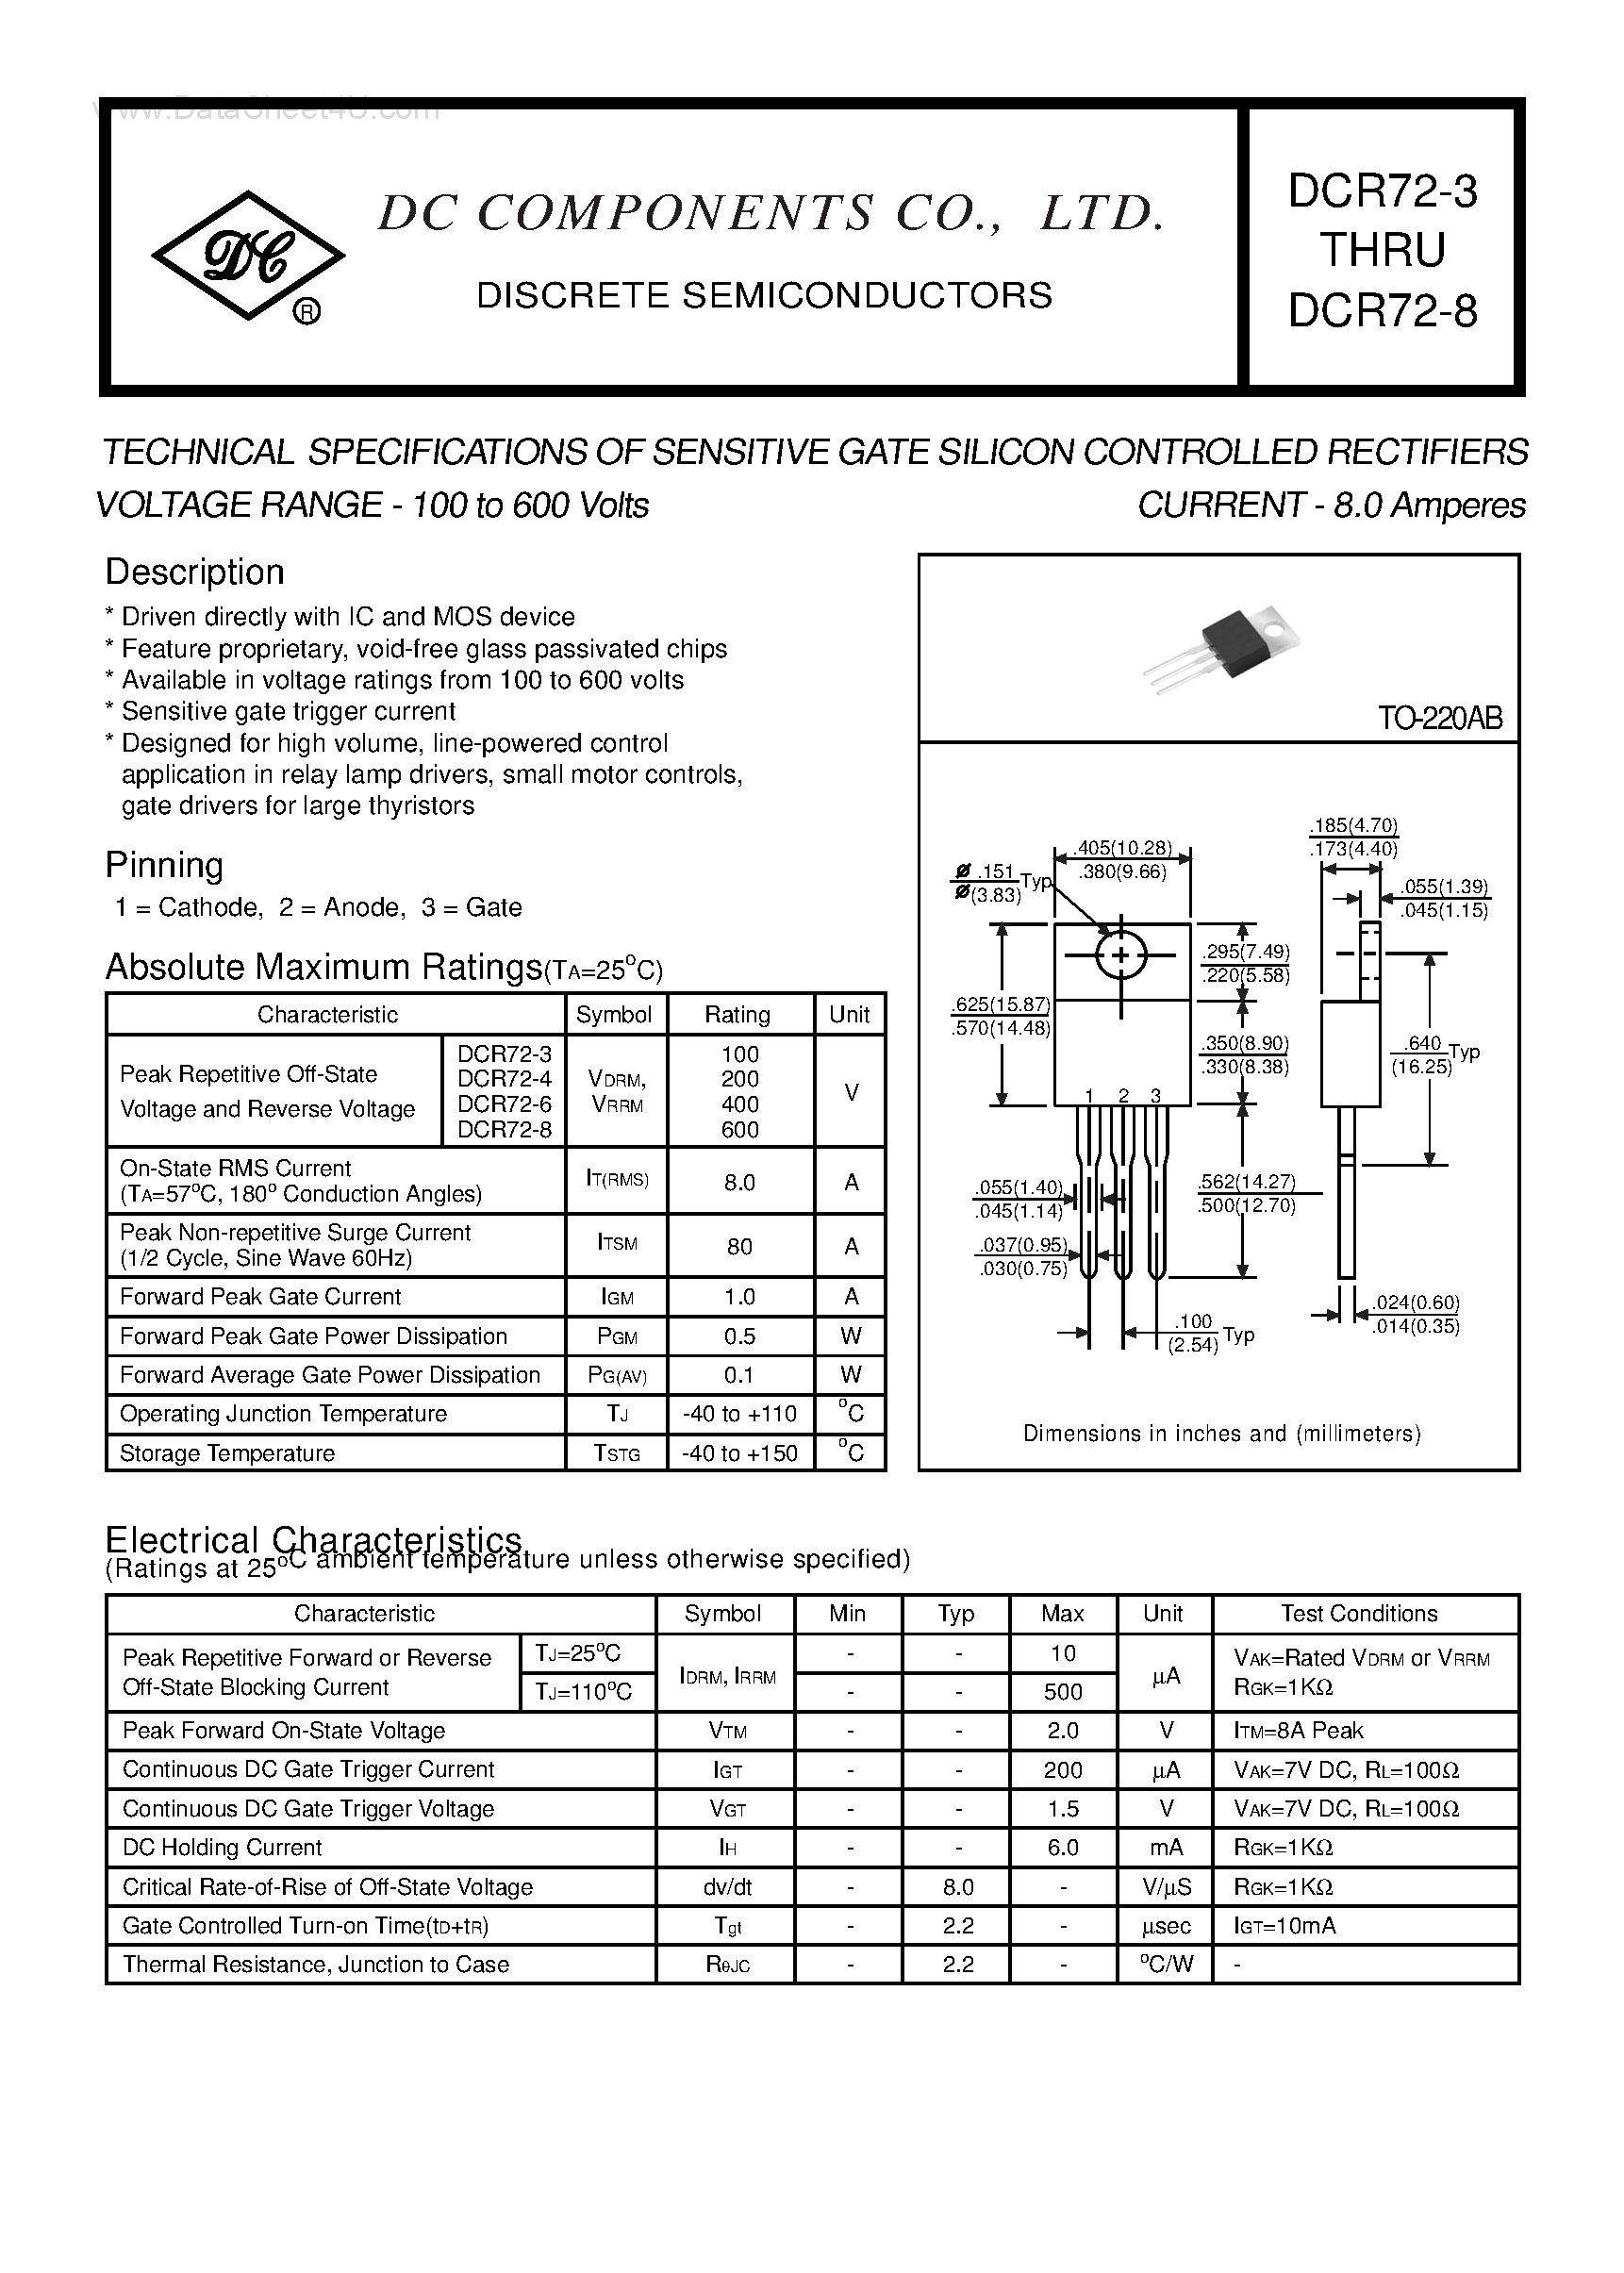 Datasheet DCR72-3 - (DCR72-3 - DCR72-8) TECHNICAL SPECIFICATIONS OF SENSITIVE GATE SILICON CONTROLLED RECTIFIERS page 1